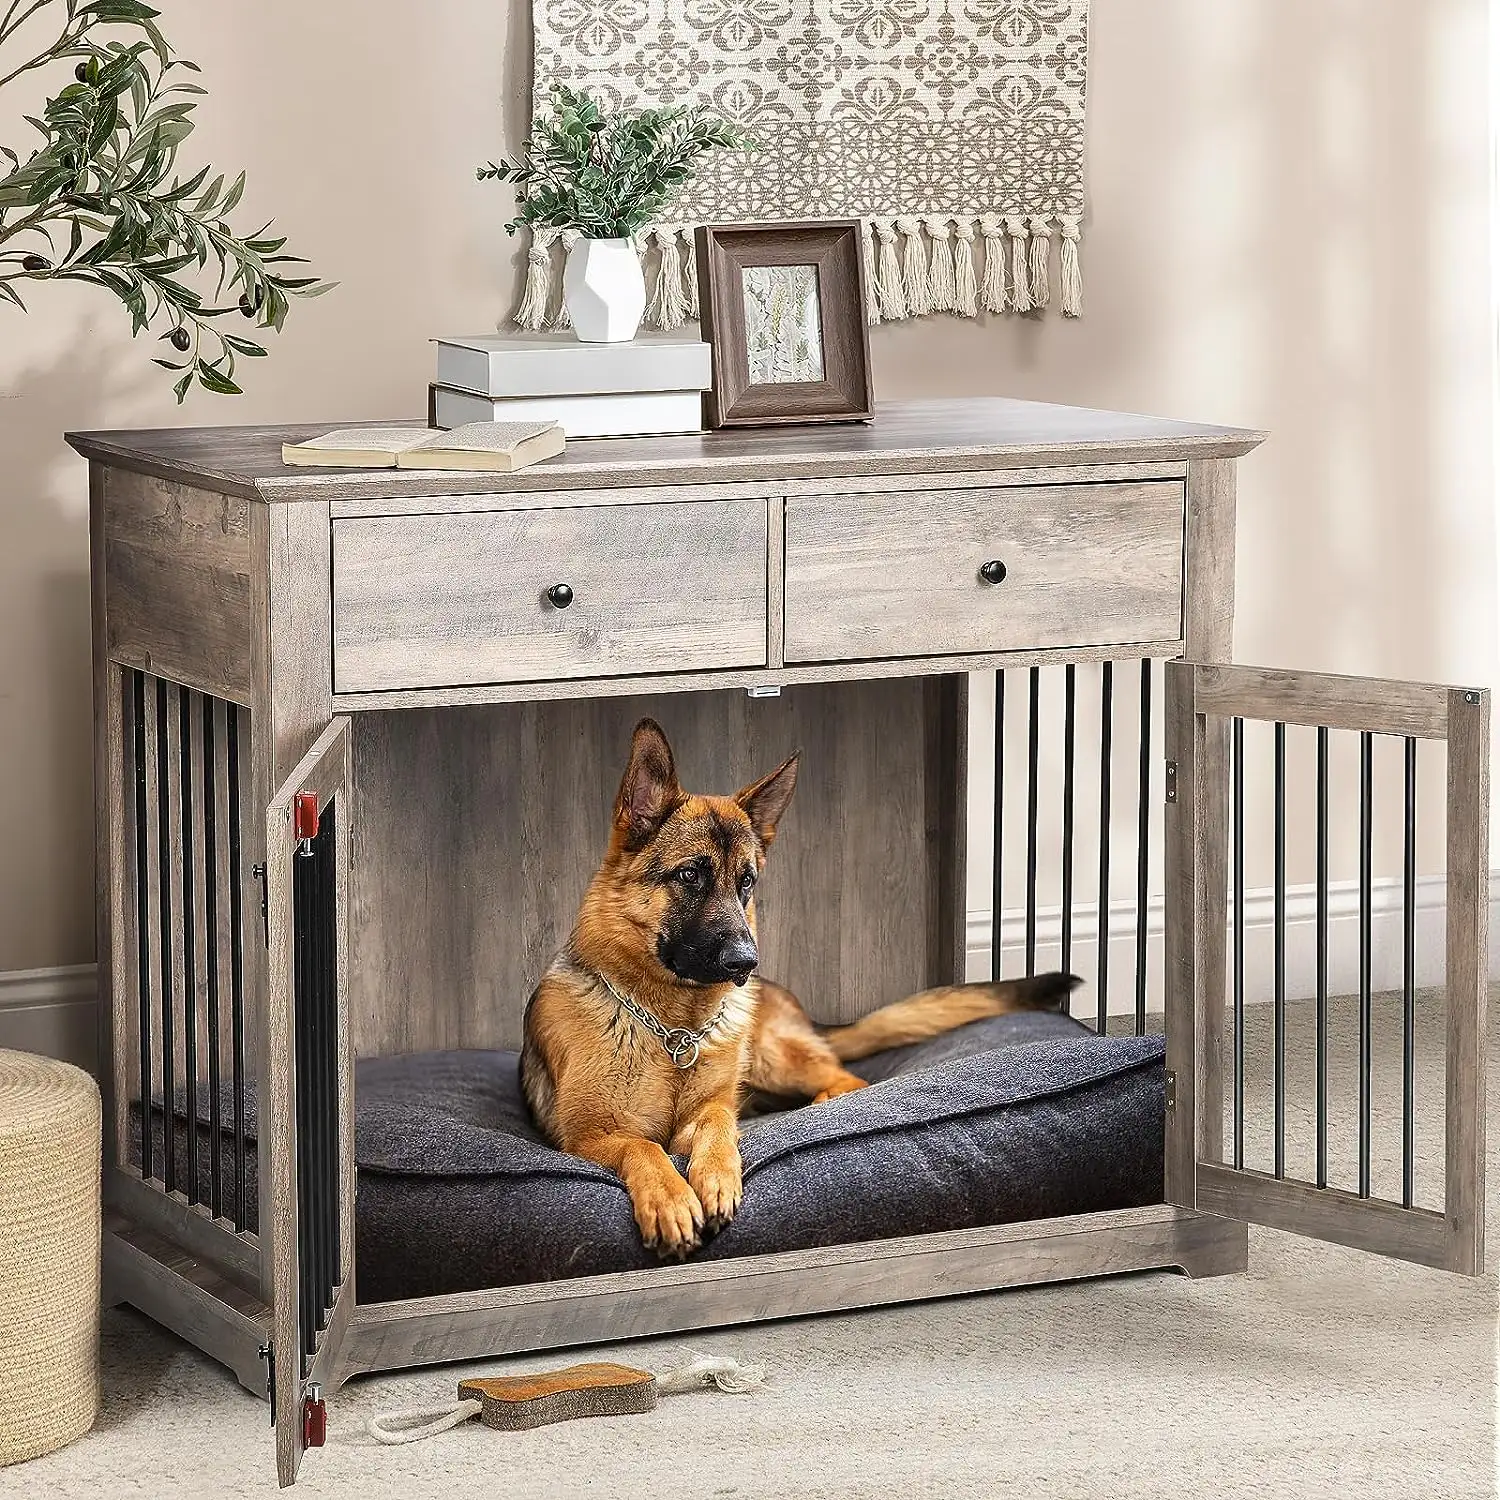 Indoor Decorative Pet Crates Dog House Wooden Dog Kennel End Table Dog Crate Furniture with Storage Drawers